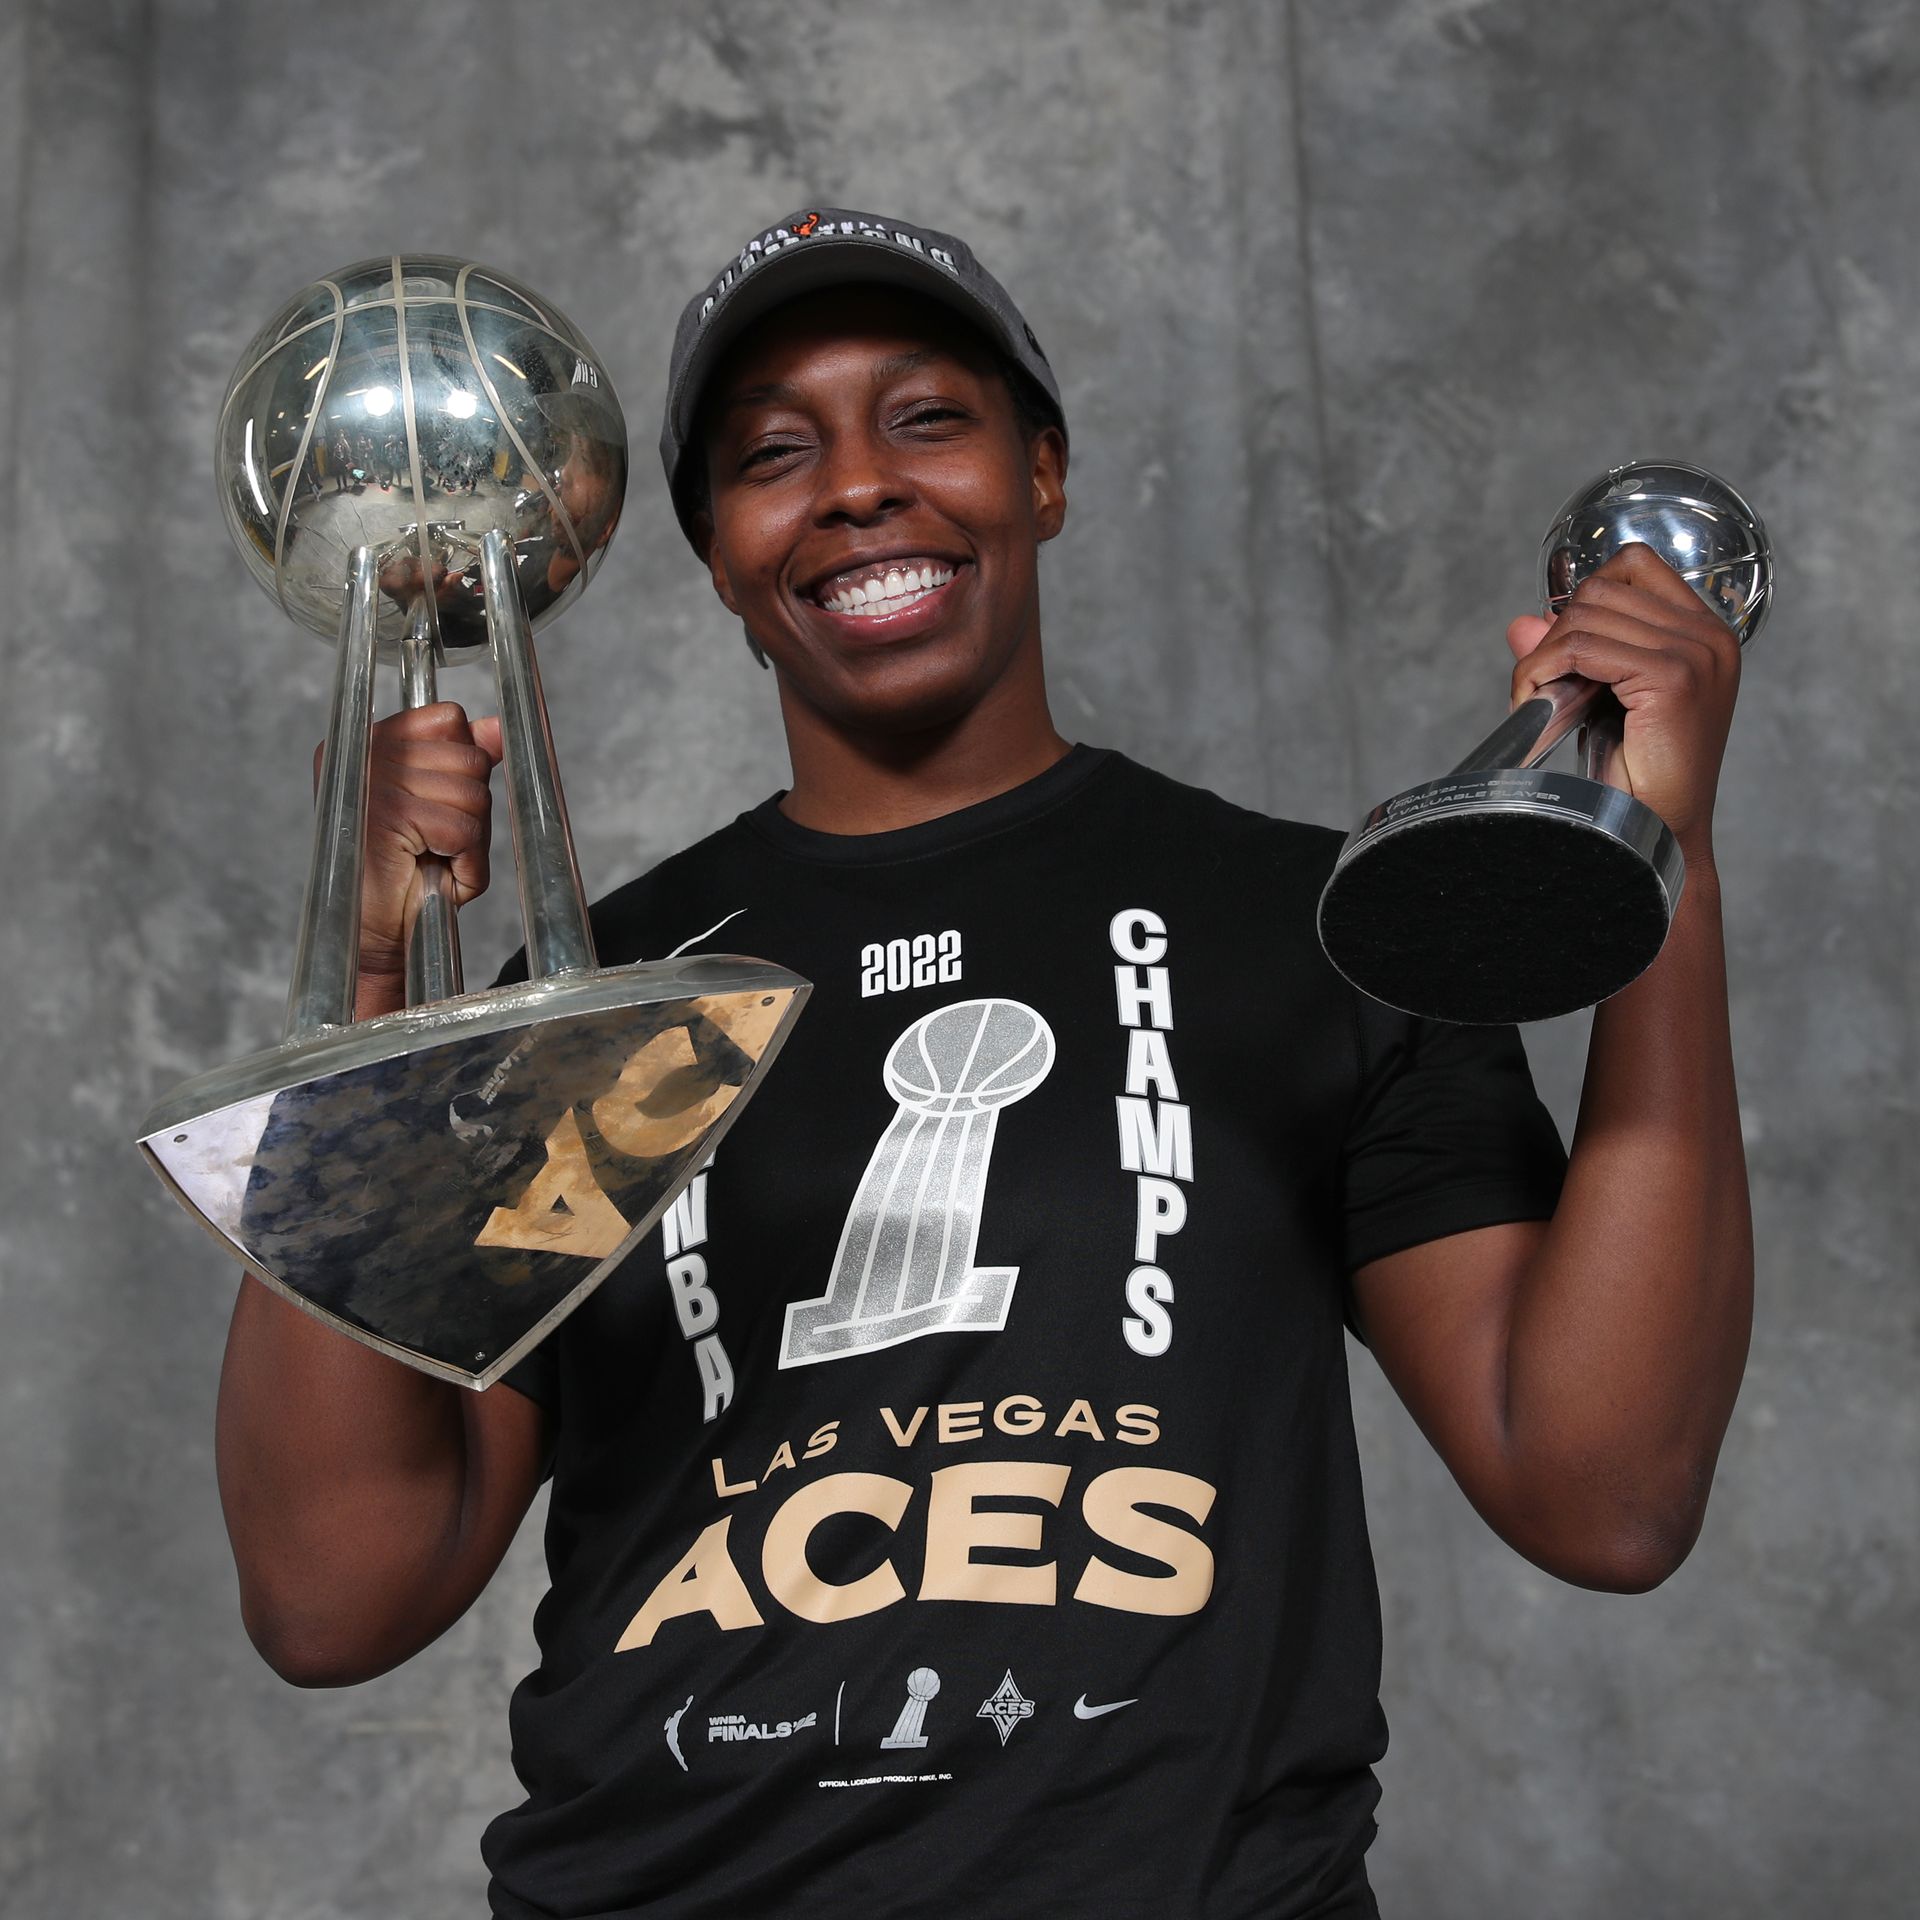 Las Vegas Aces: 2022 Champions Logo - Officially Licensed WNBA